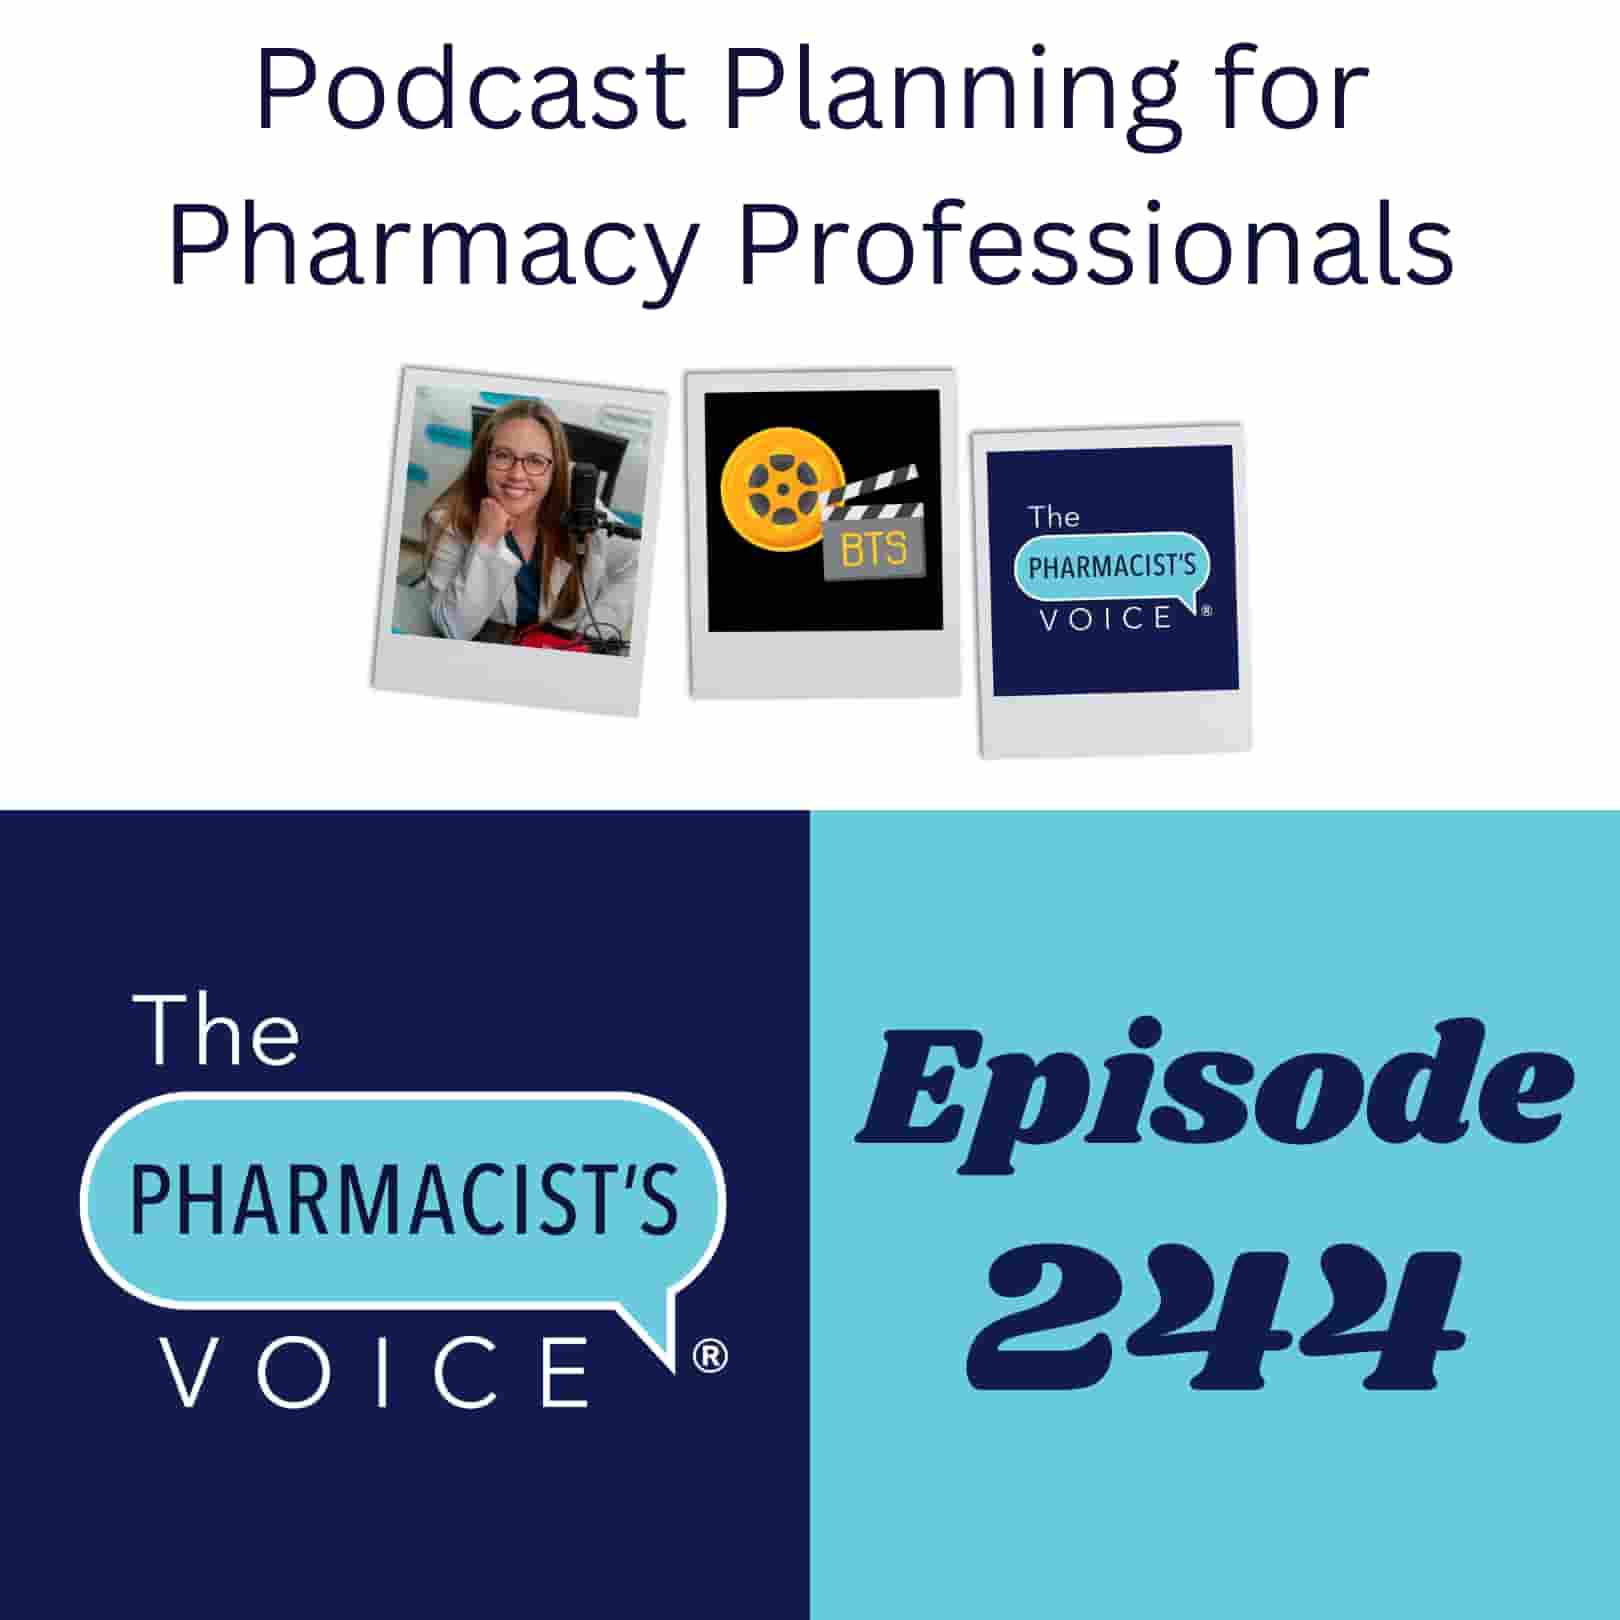 Podcast planning for pharmacy professionals. The Pharmacist's Voice Podcast Episode 244.